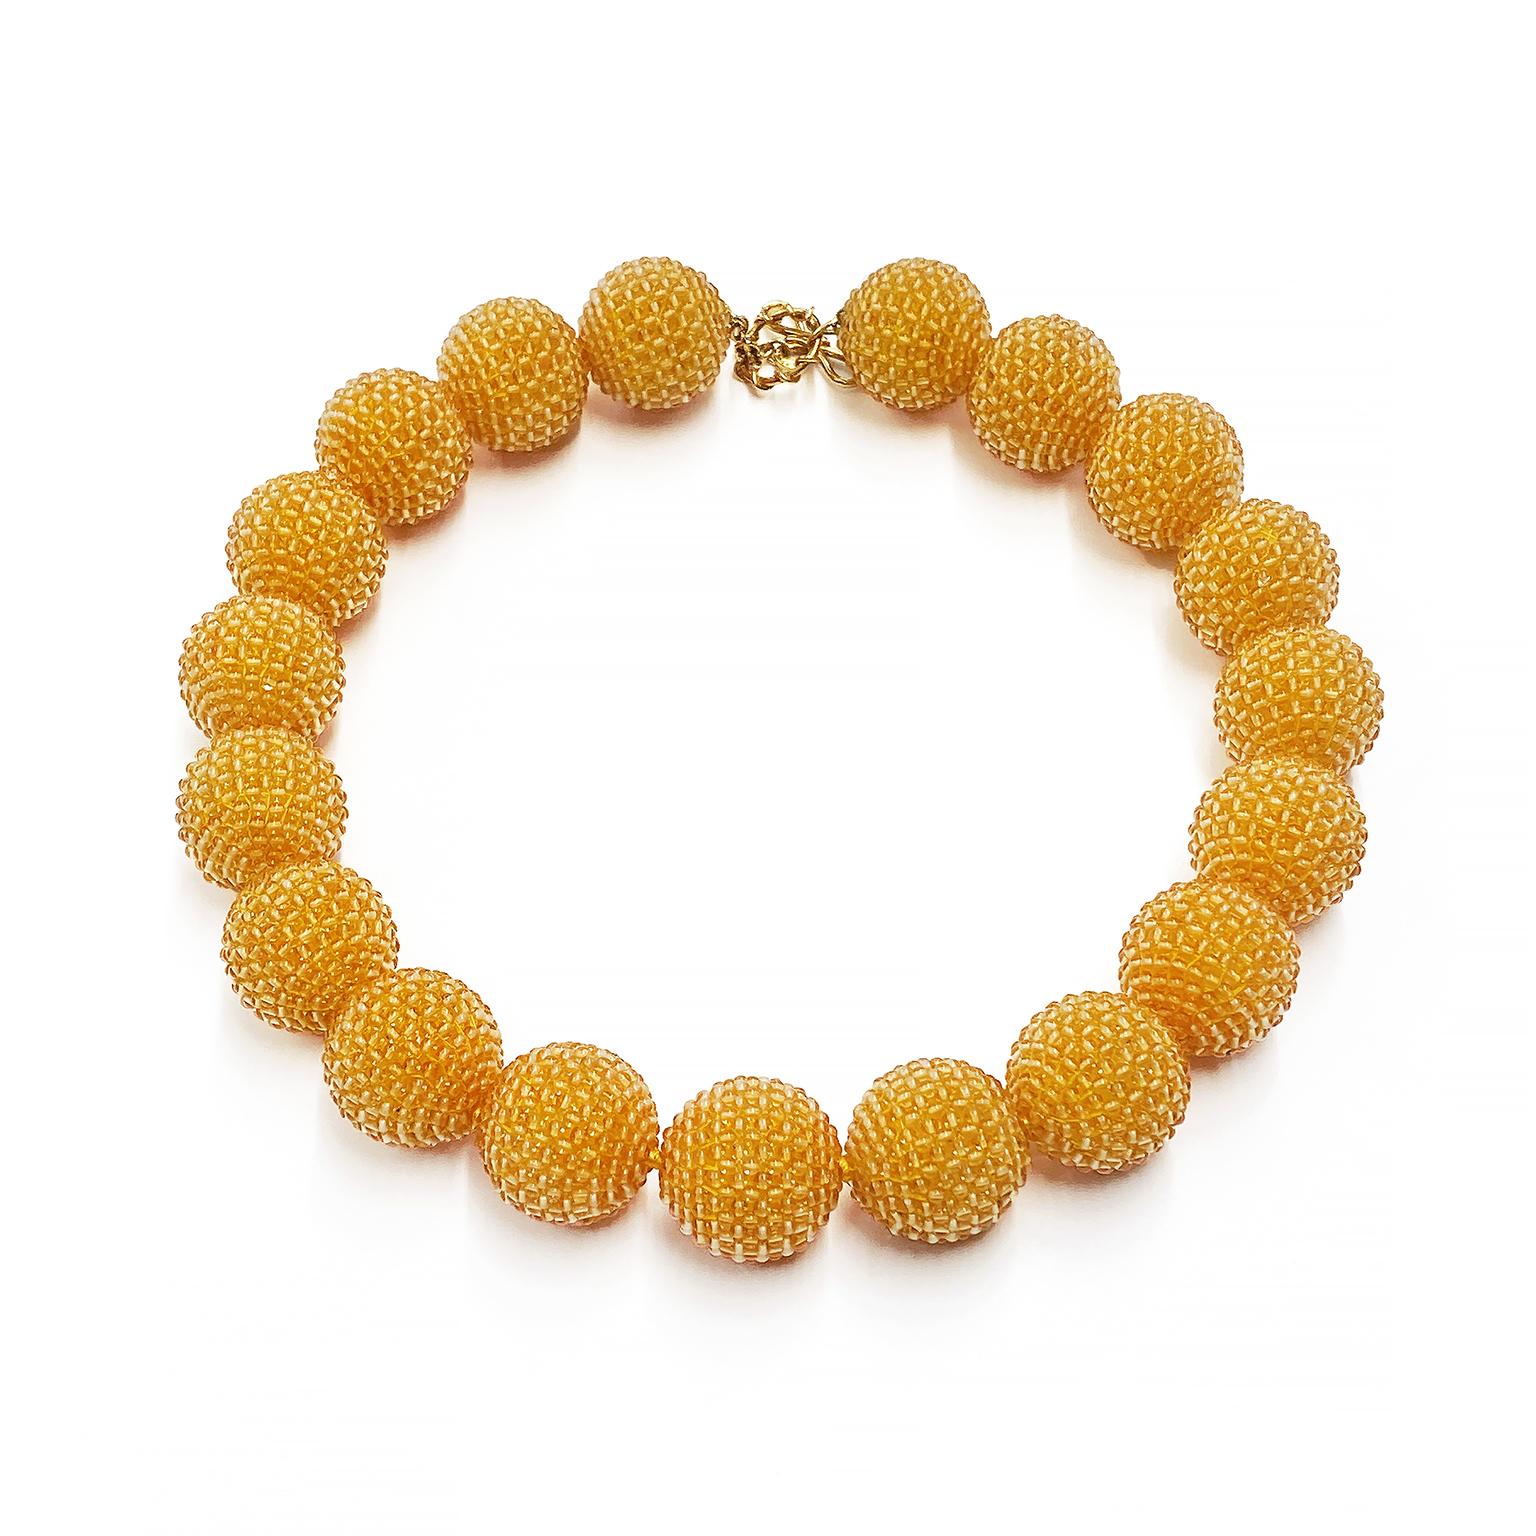 Hand selected citrine beads create both an elaborate and elegant touch to this necklace. Citrine beads in patterns of parallel stripes and checkerboard in the center, are woven on orbs measuring 25mm in diameter. Strung on a single strand, an 18k